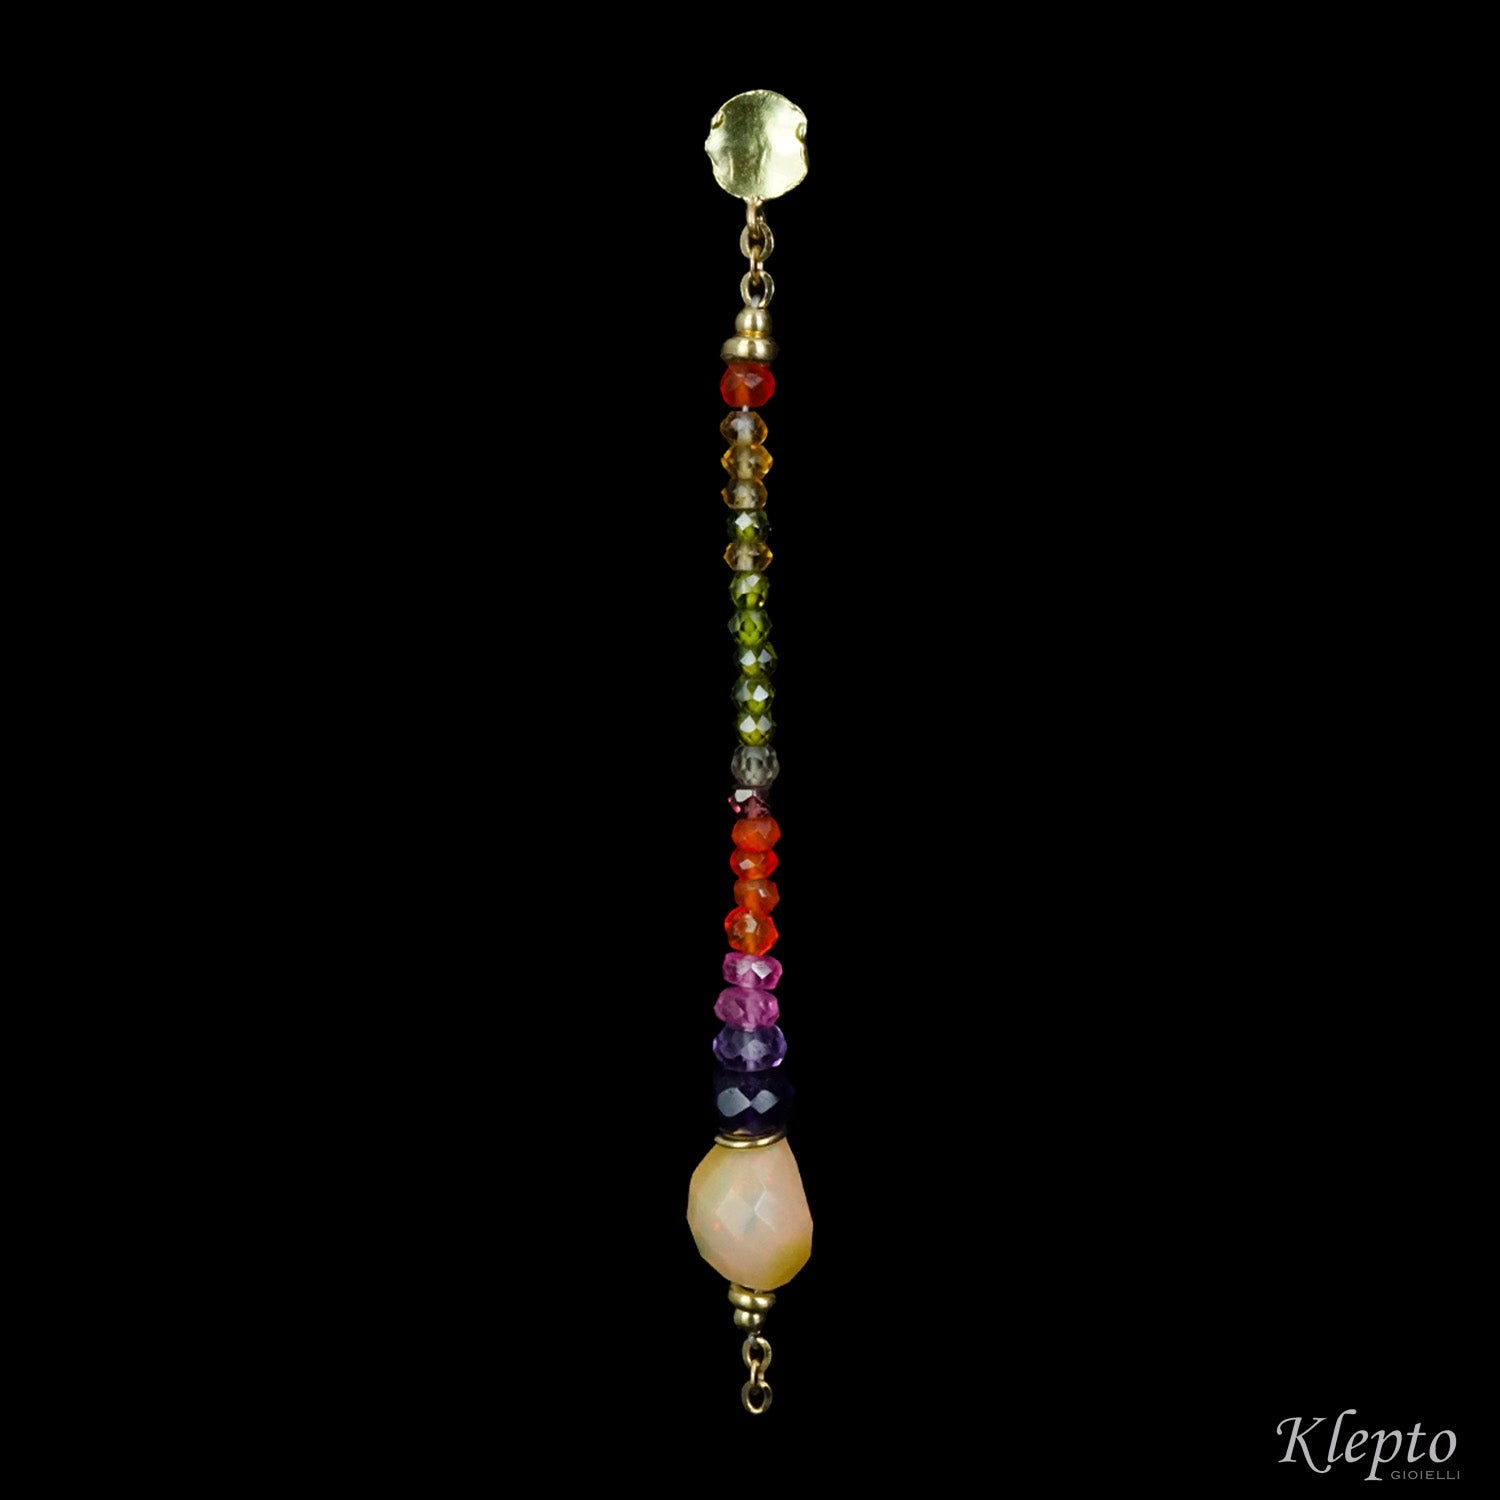 Rainbow earrings in yellow gold with stones